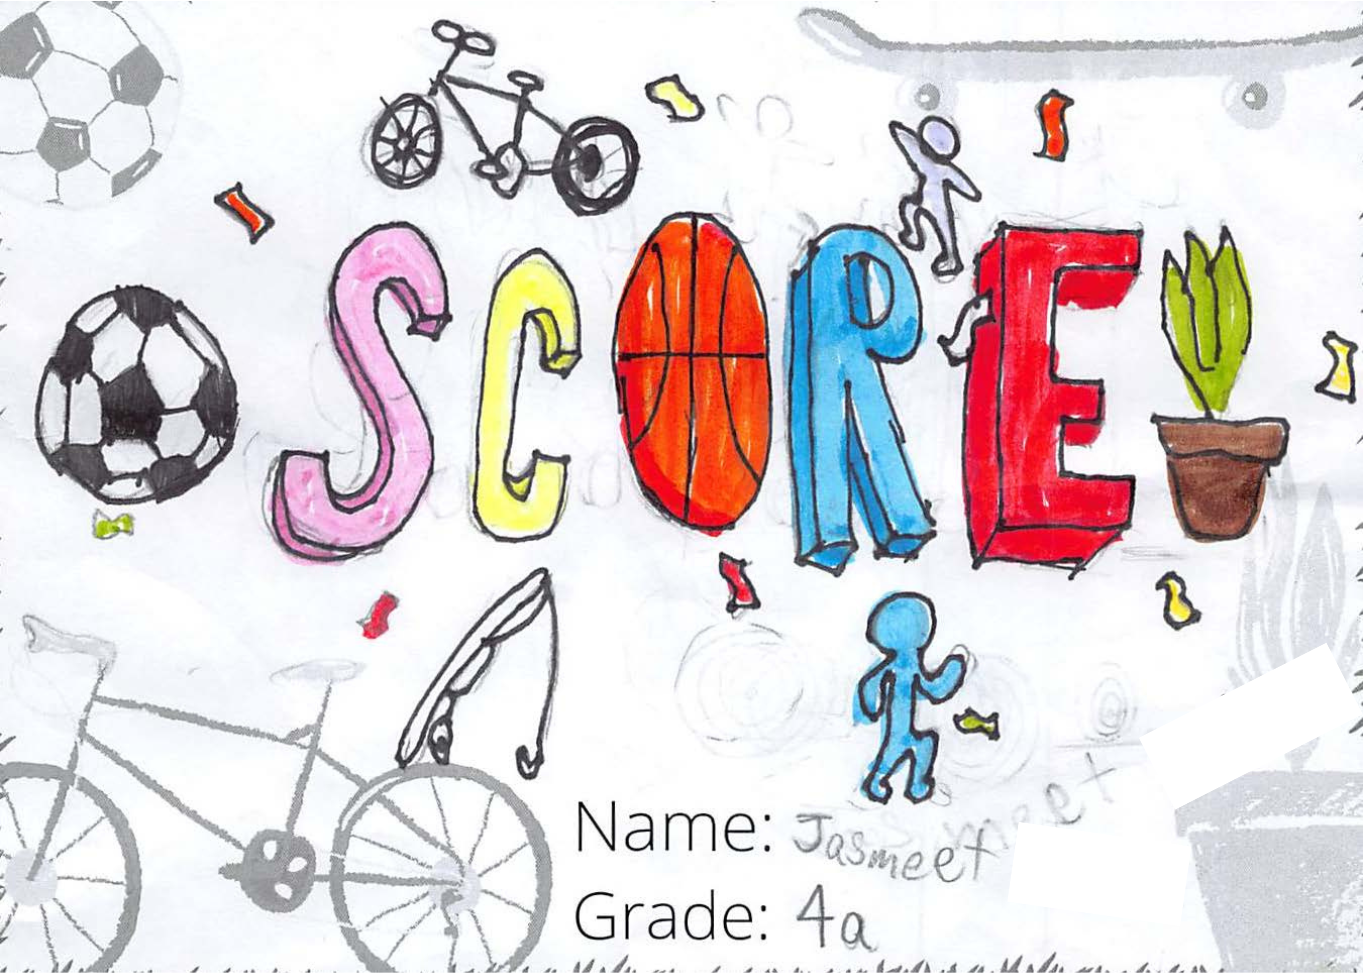 Marker drawing for the SCORE! logo contest. The drawing includes many sports and physical activities.